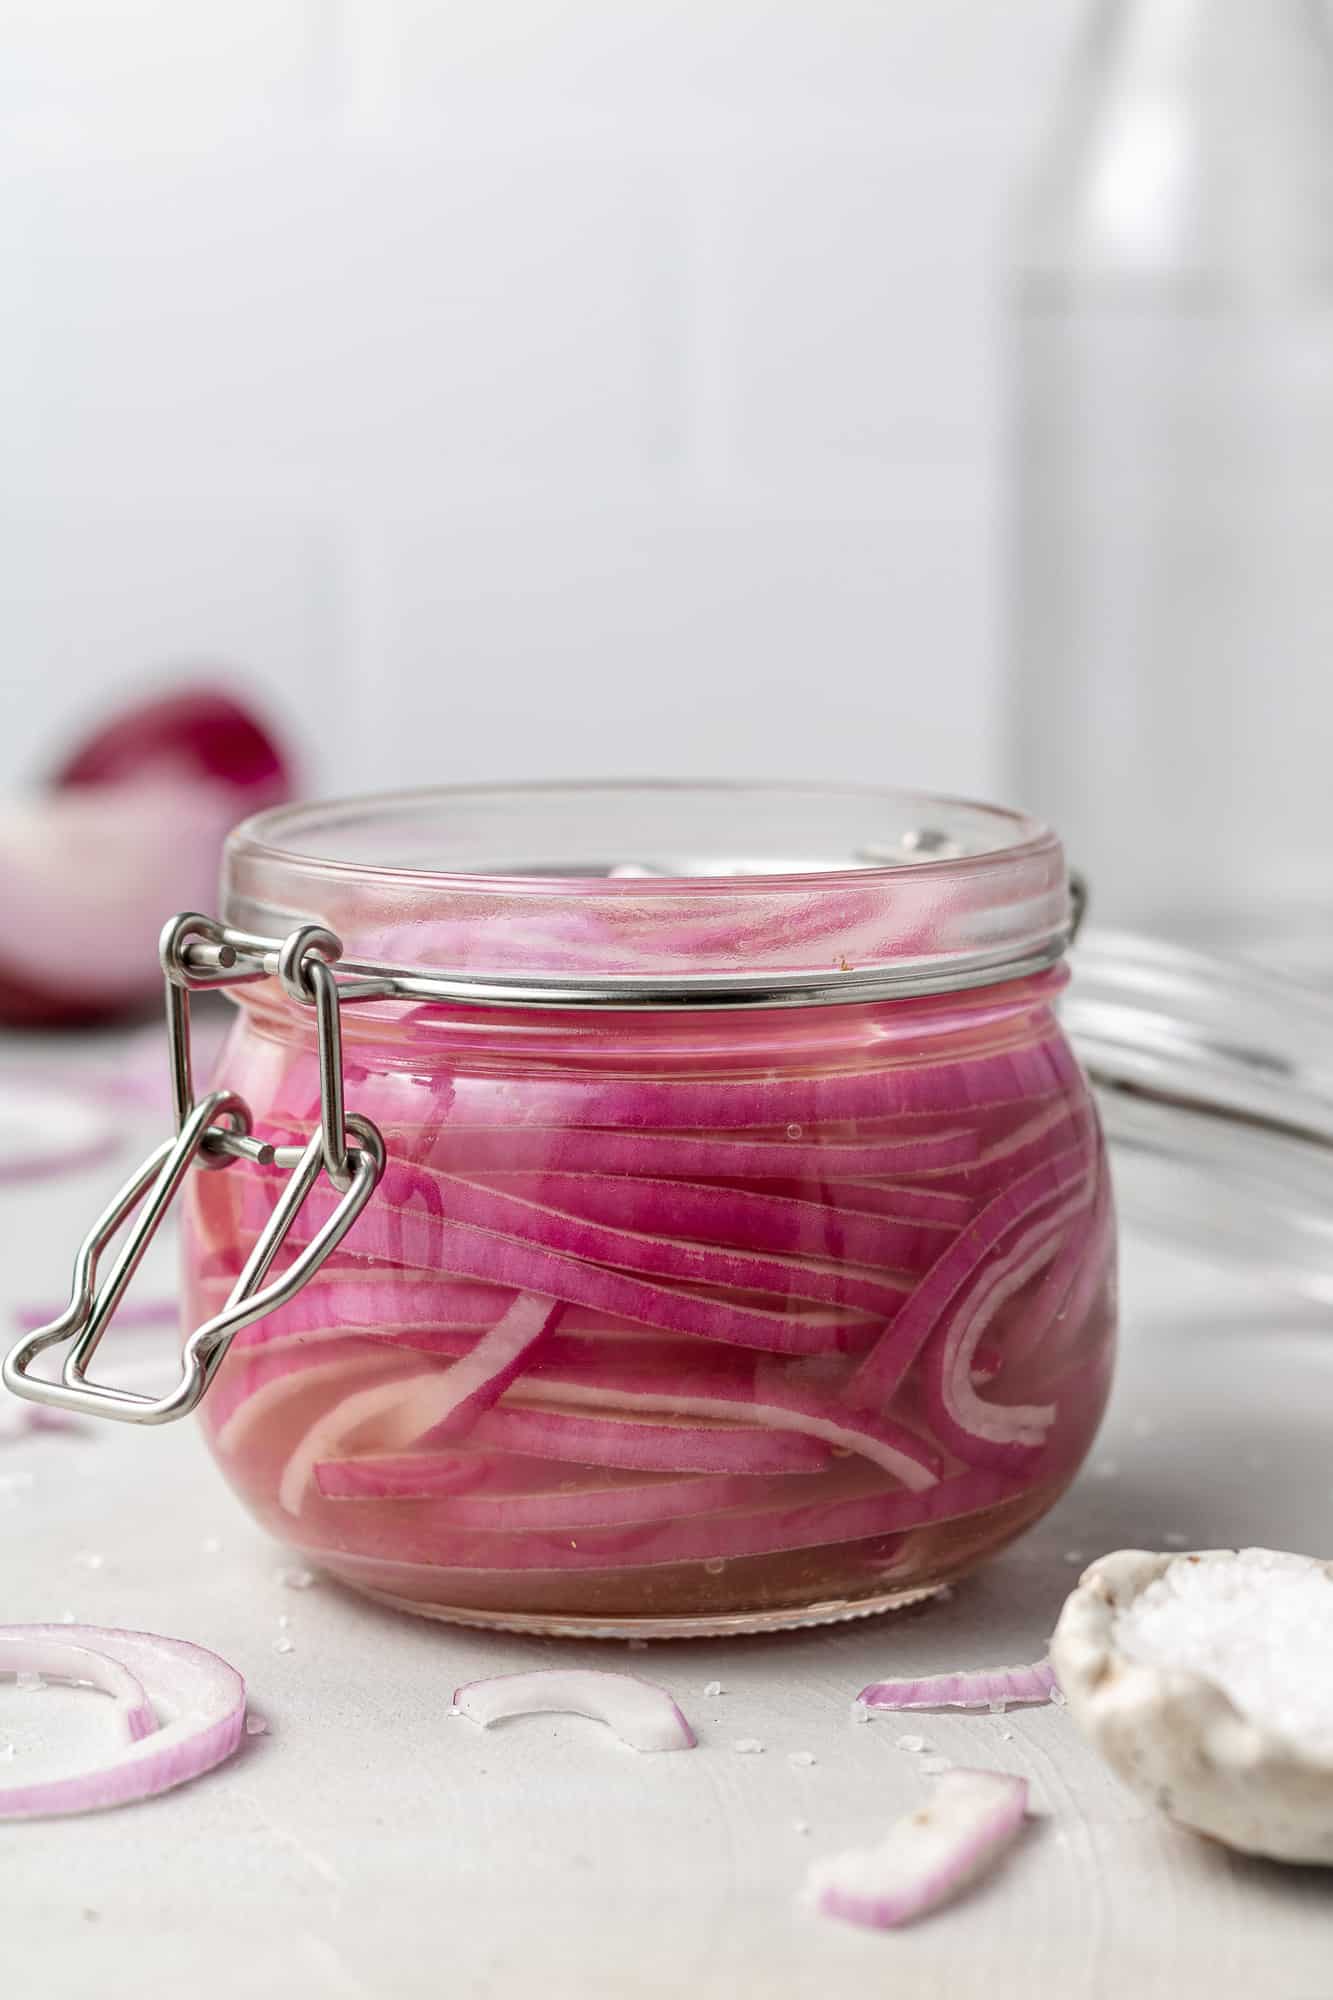 Sliced red onions in pickling solution in small glass jar.